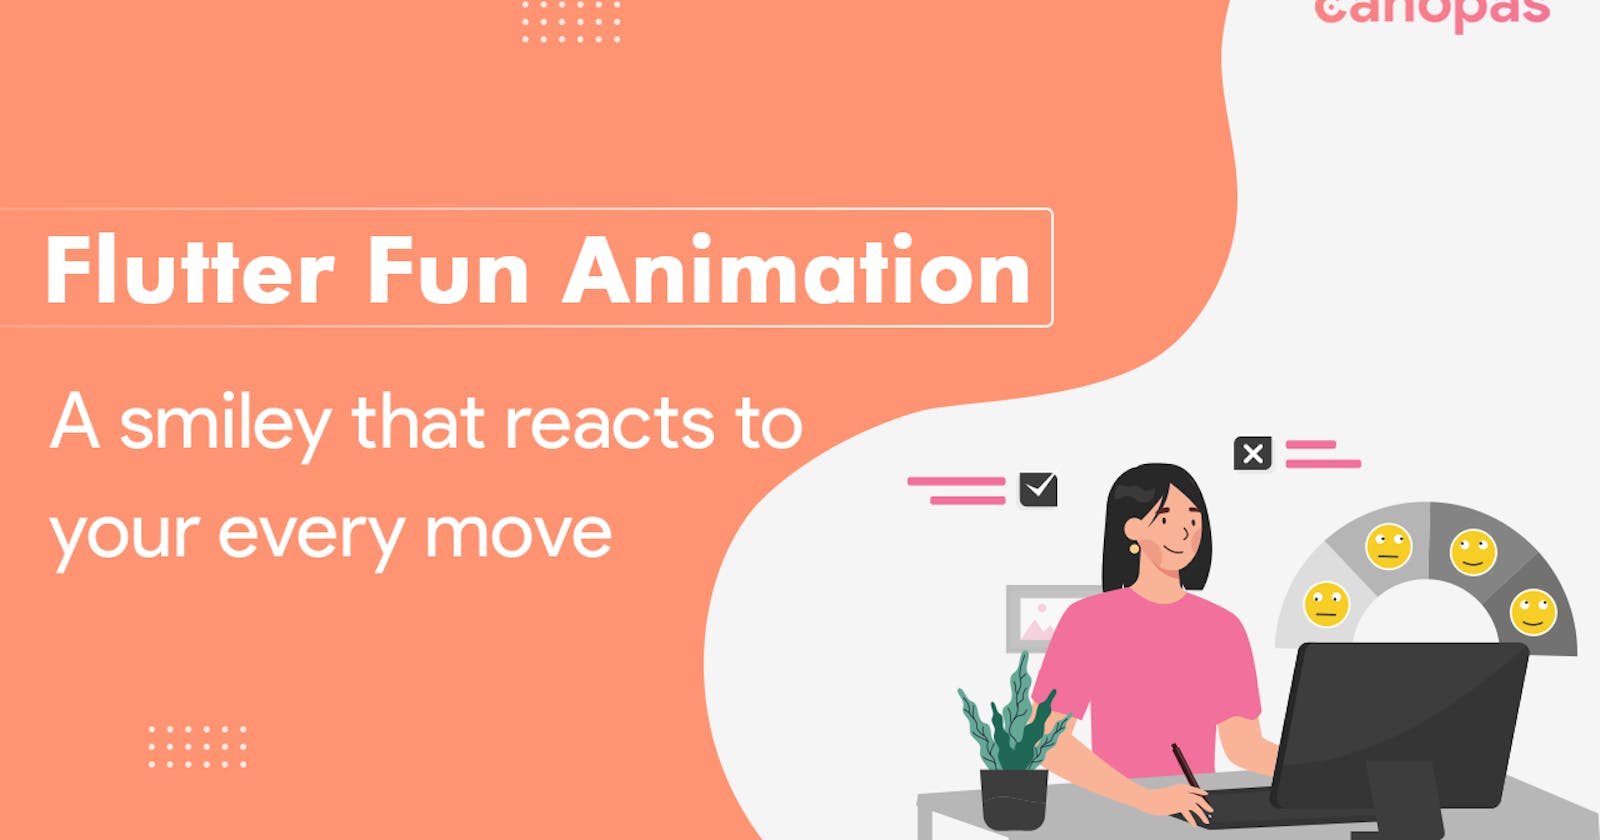 Animation In Flutter - A Smiley That Reacts to Your Every Move